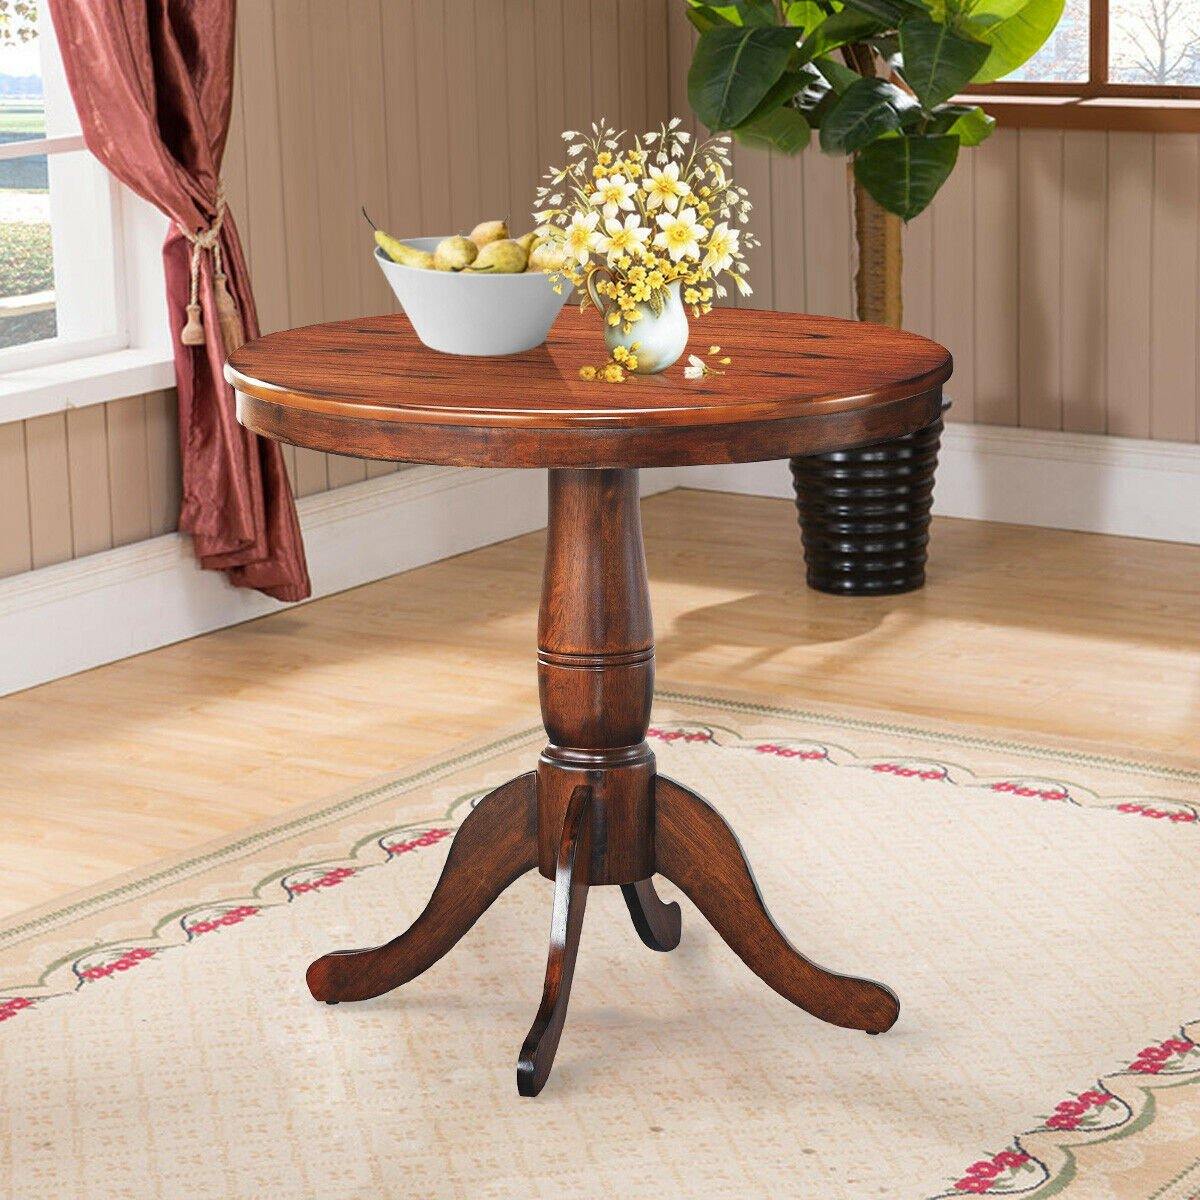 Table 30" Wooden Round Pub Pedestal Side Table (30 Inch) - Giantexus